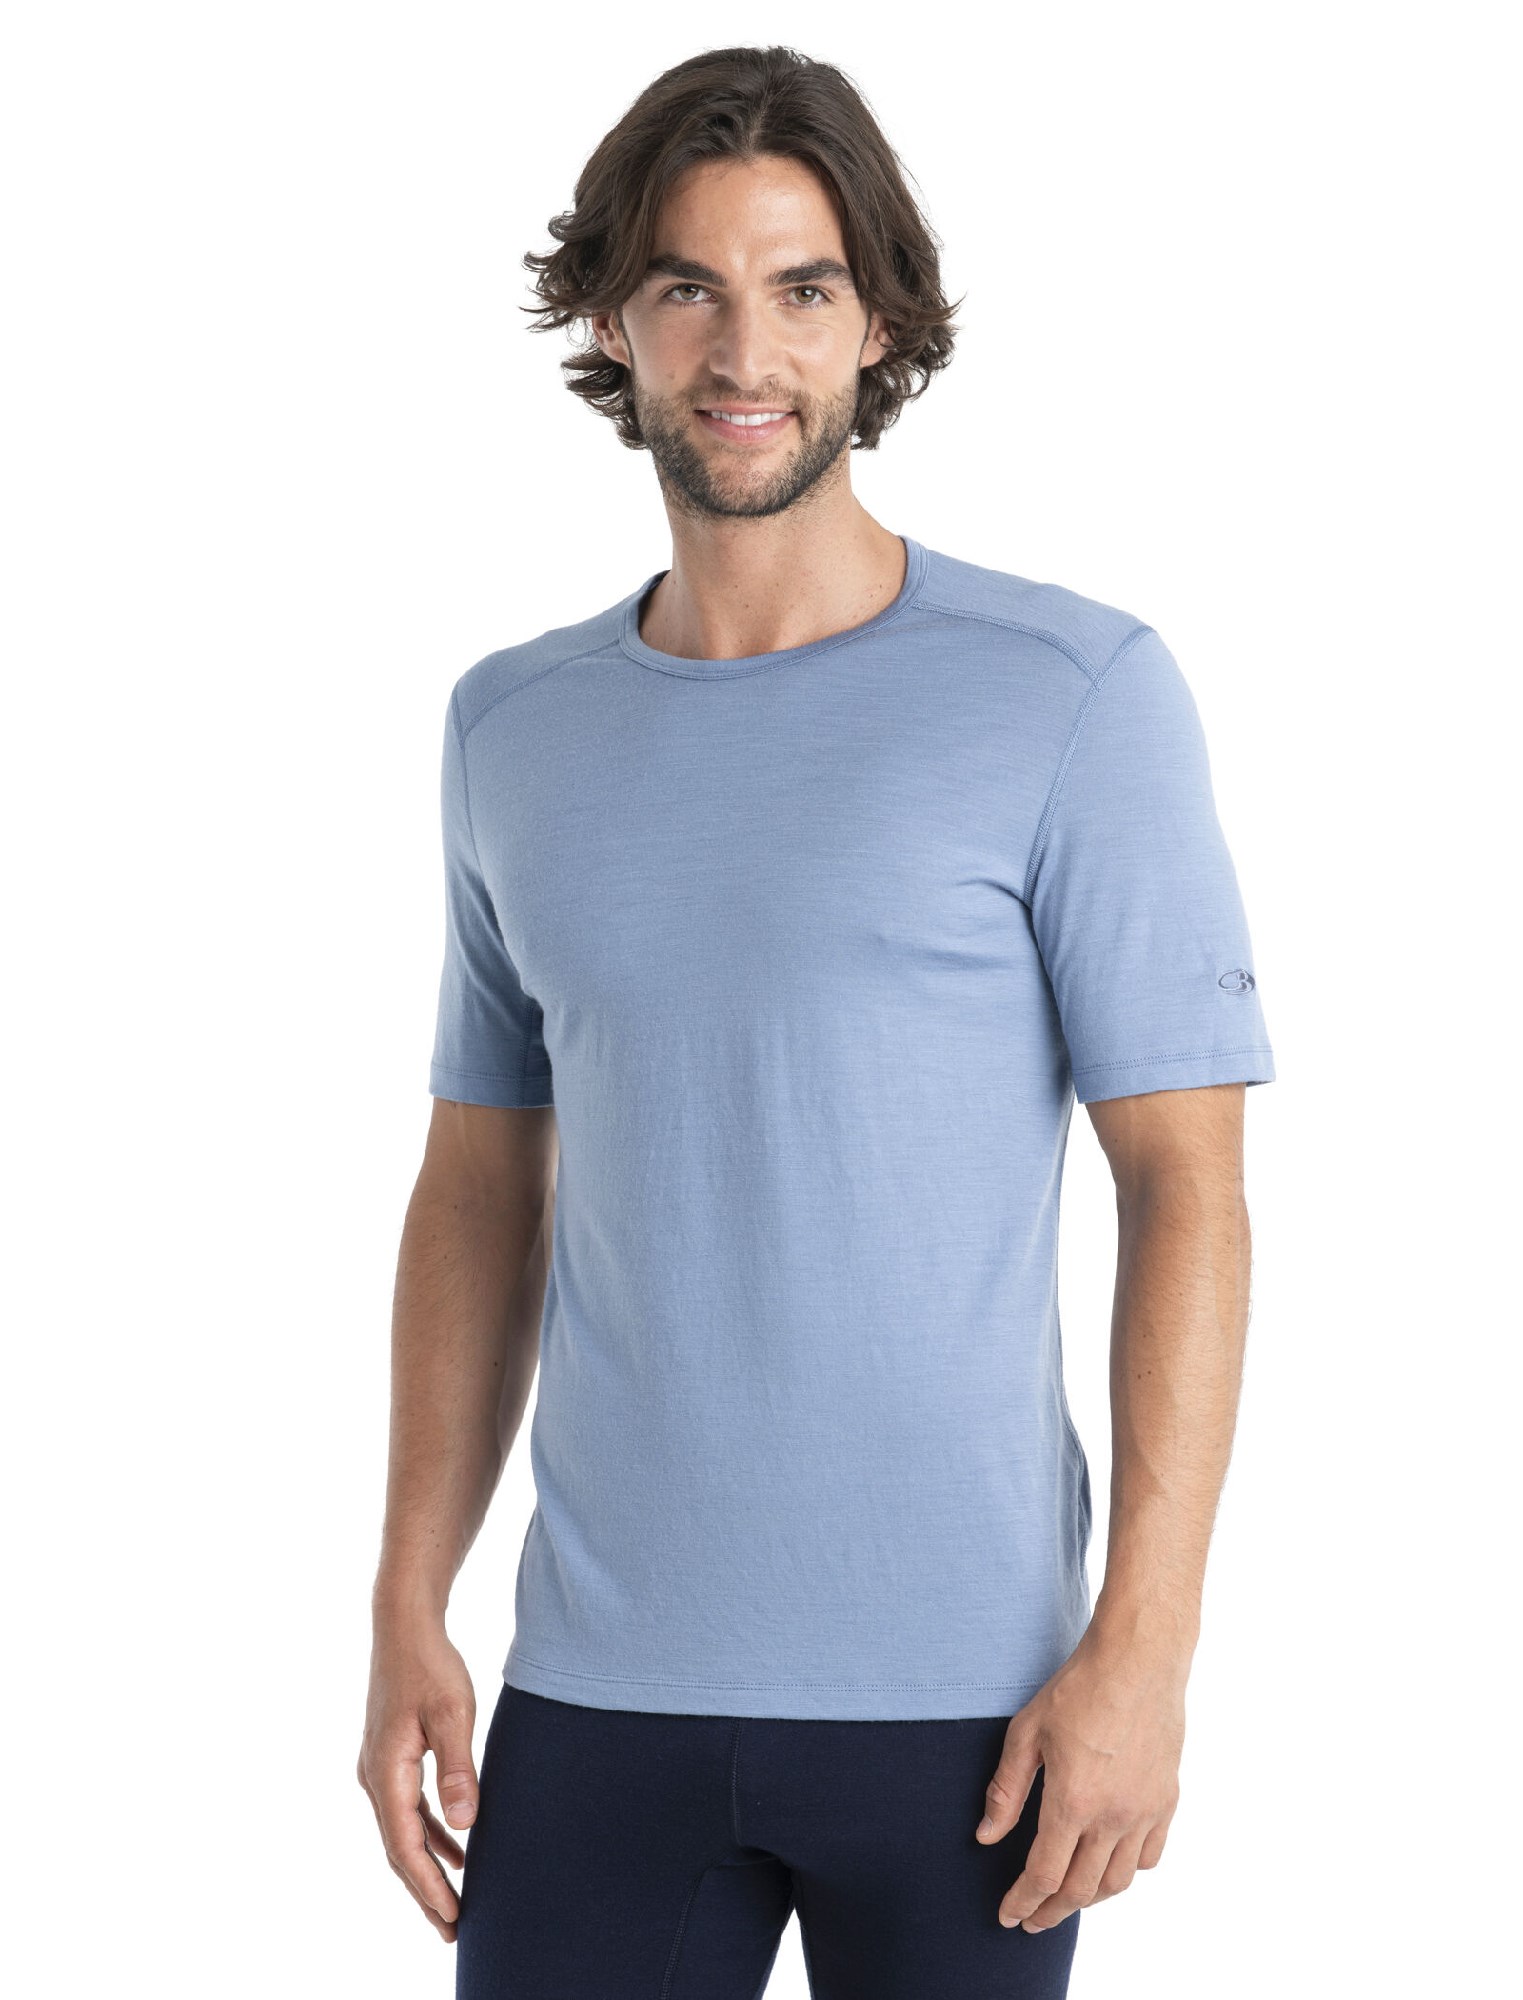 Icebreaker 200 Oasis Short Sleeve Crewe Thermal Top - Men's , Up to 22% Off  with Free S&H — CampSaver